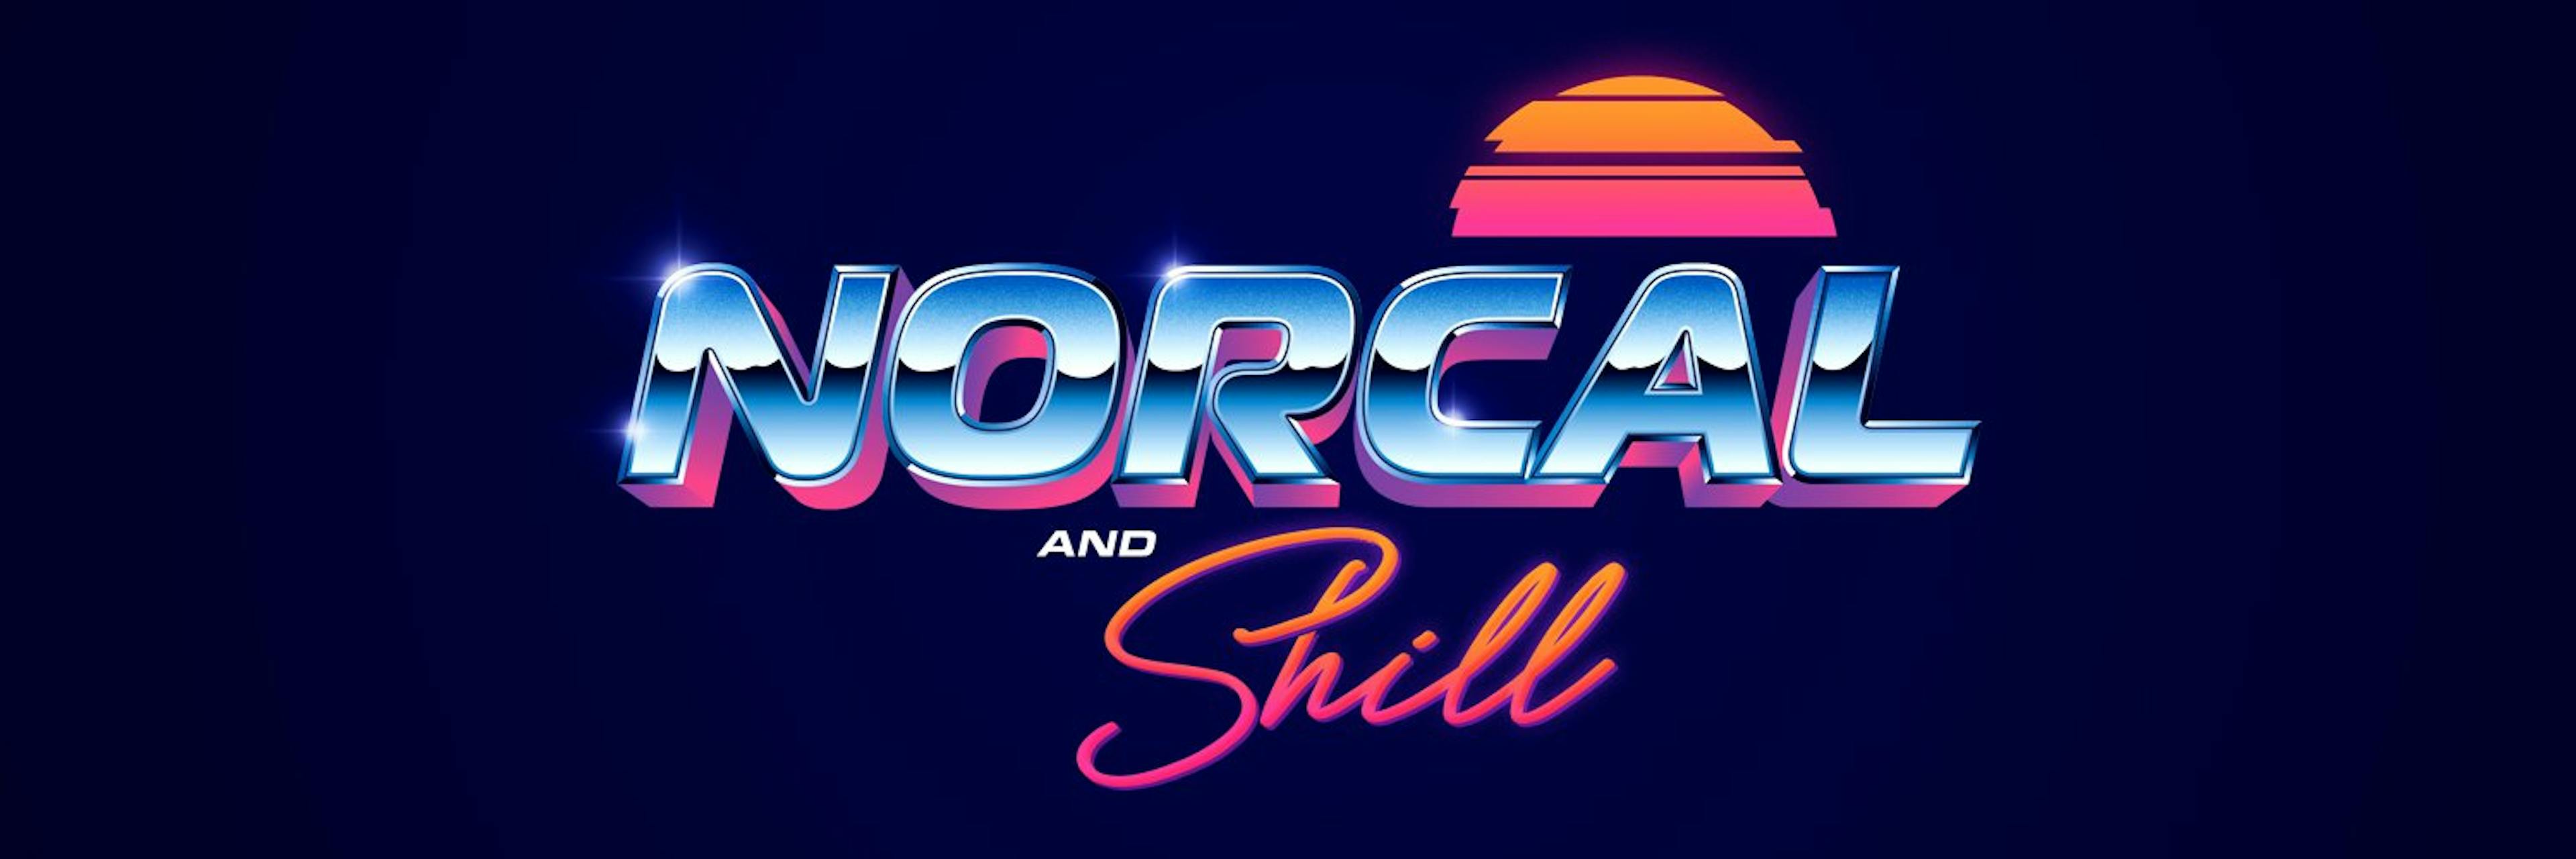 I want to NorCal and Shill with NorCalGuy he's super cool- I've been a SoCal girl for so long- it's time for a change! Check him out for chill-laxed education. 